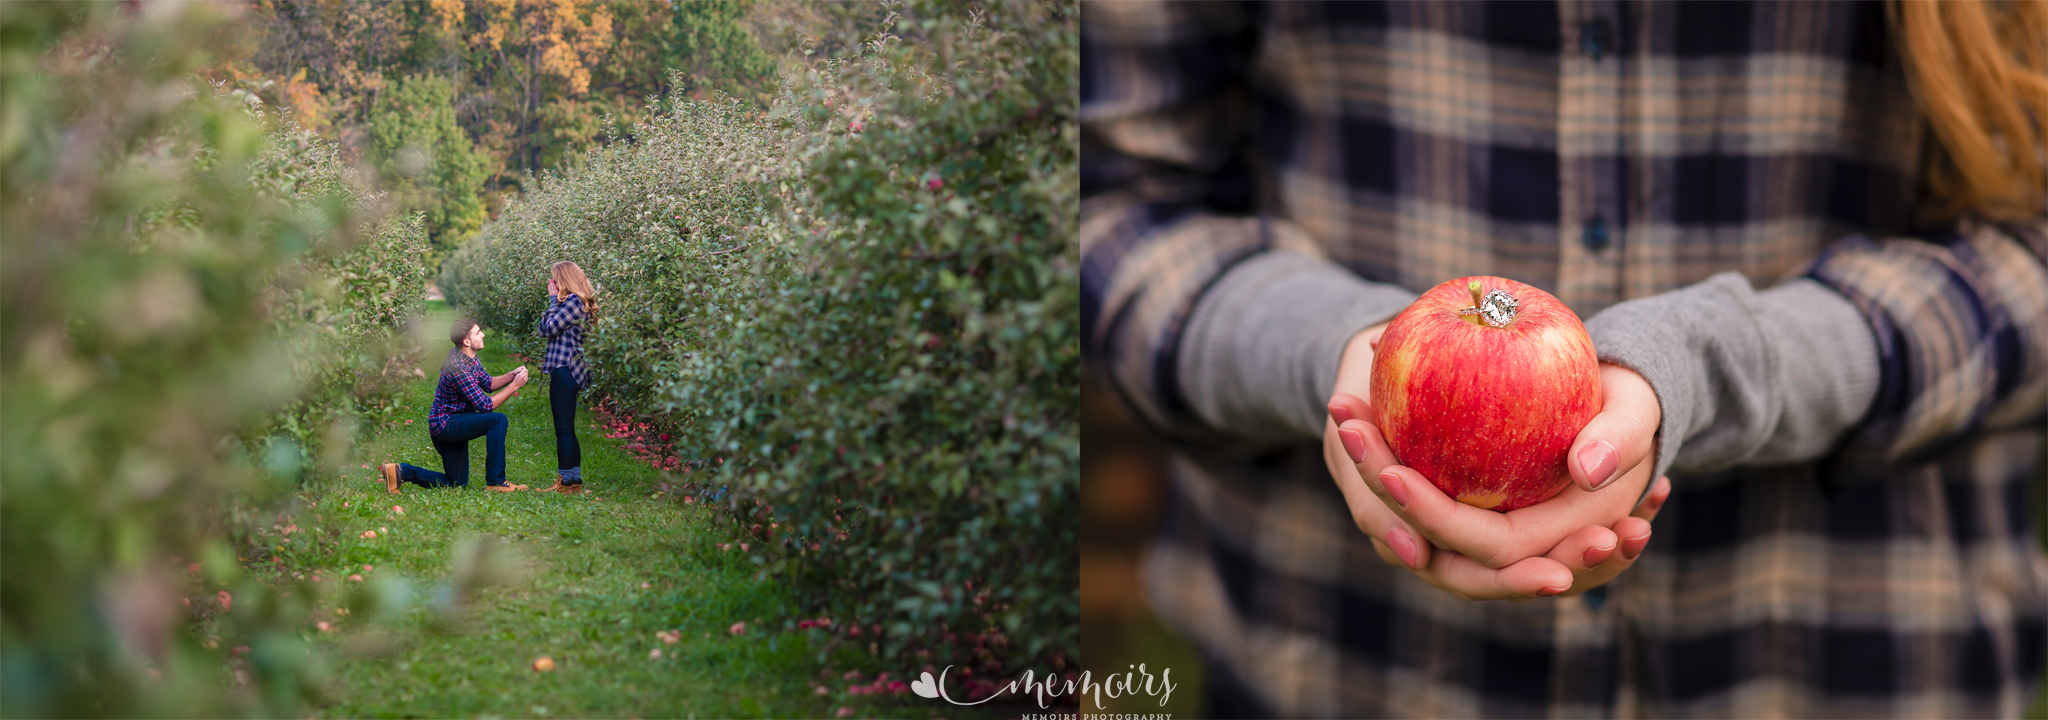 Apple Orchard Proposal Session